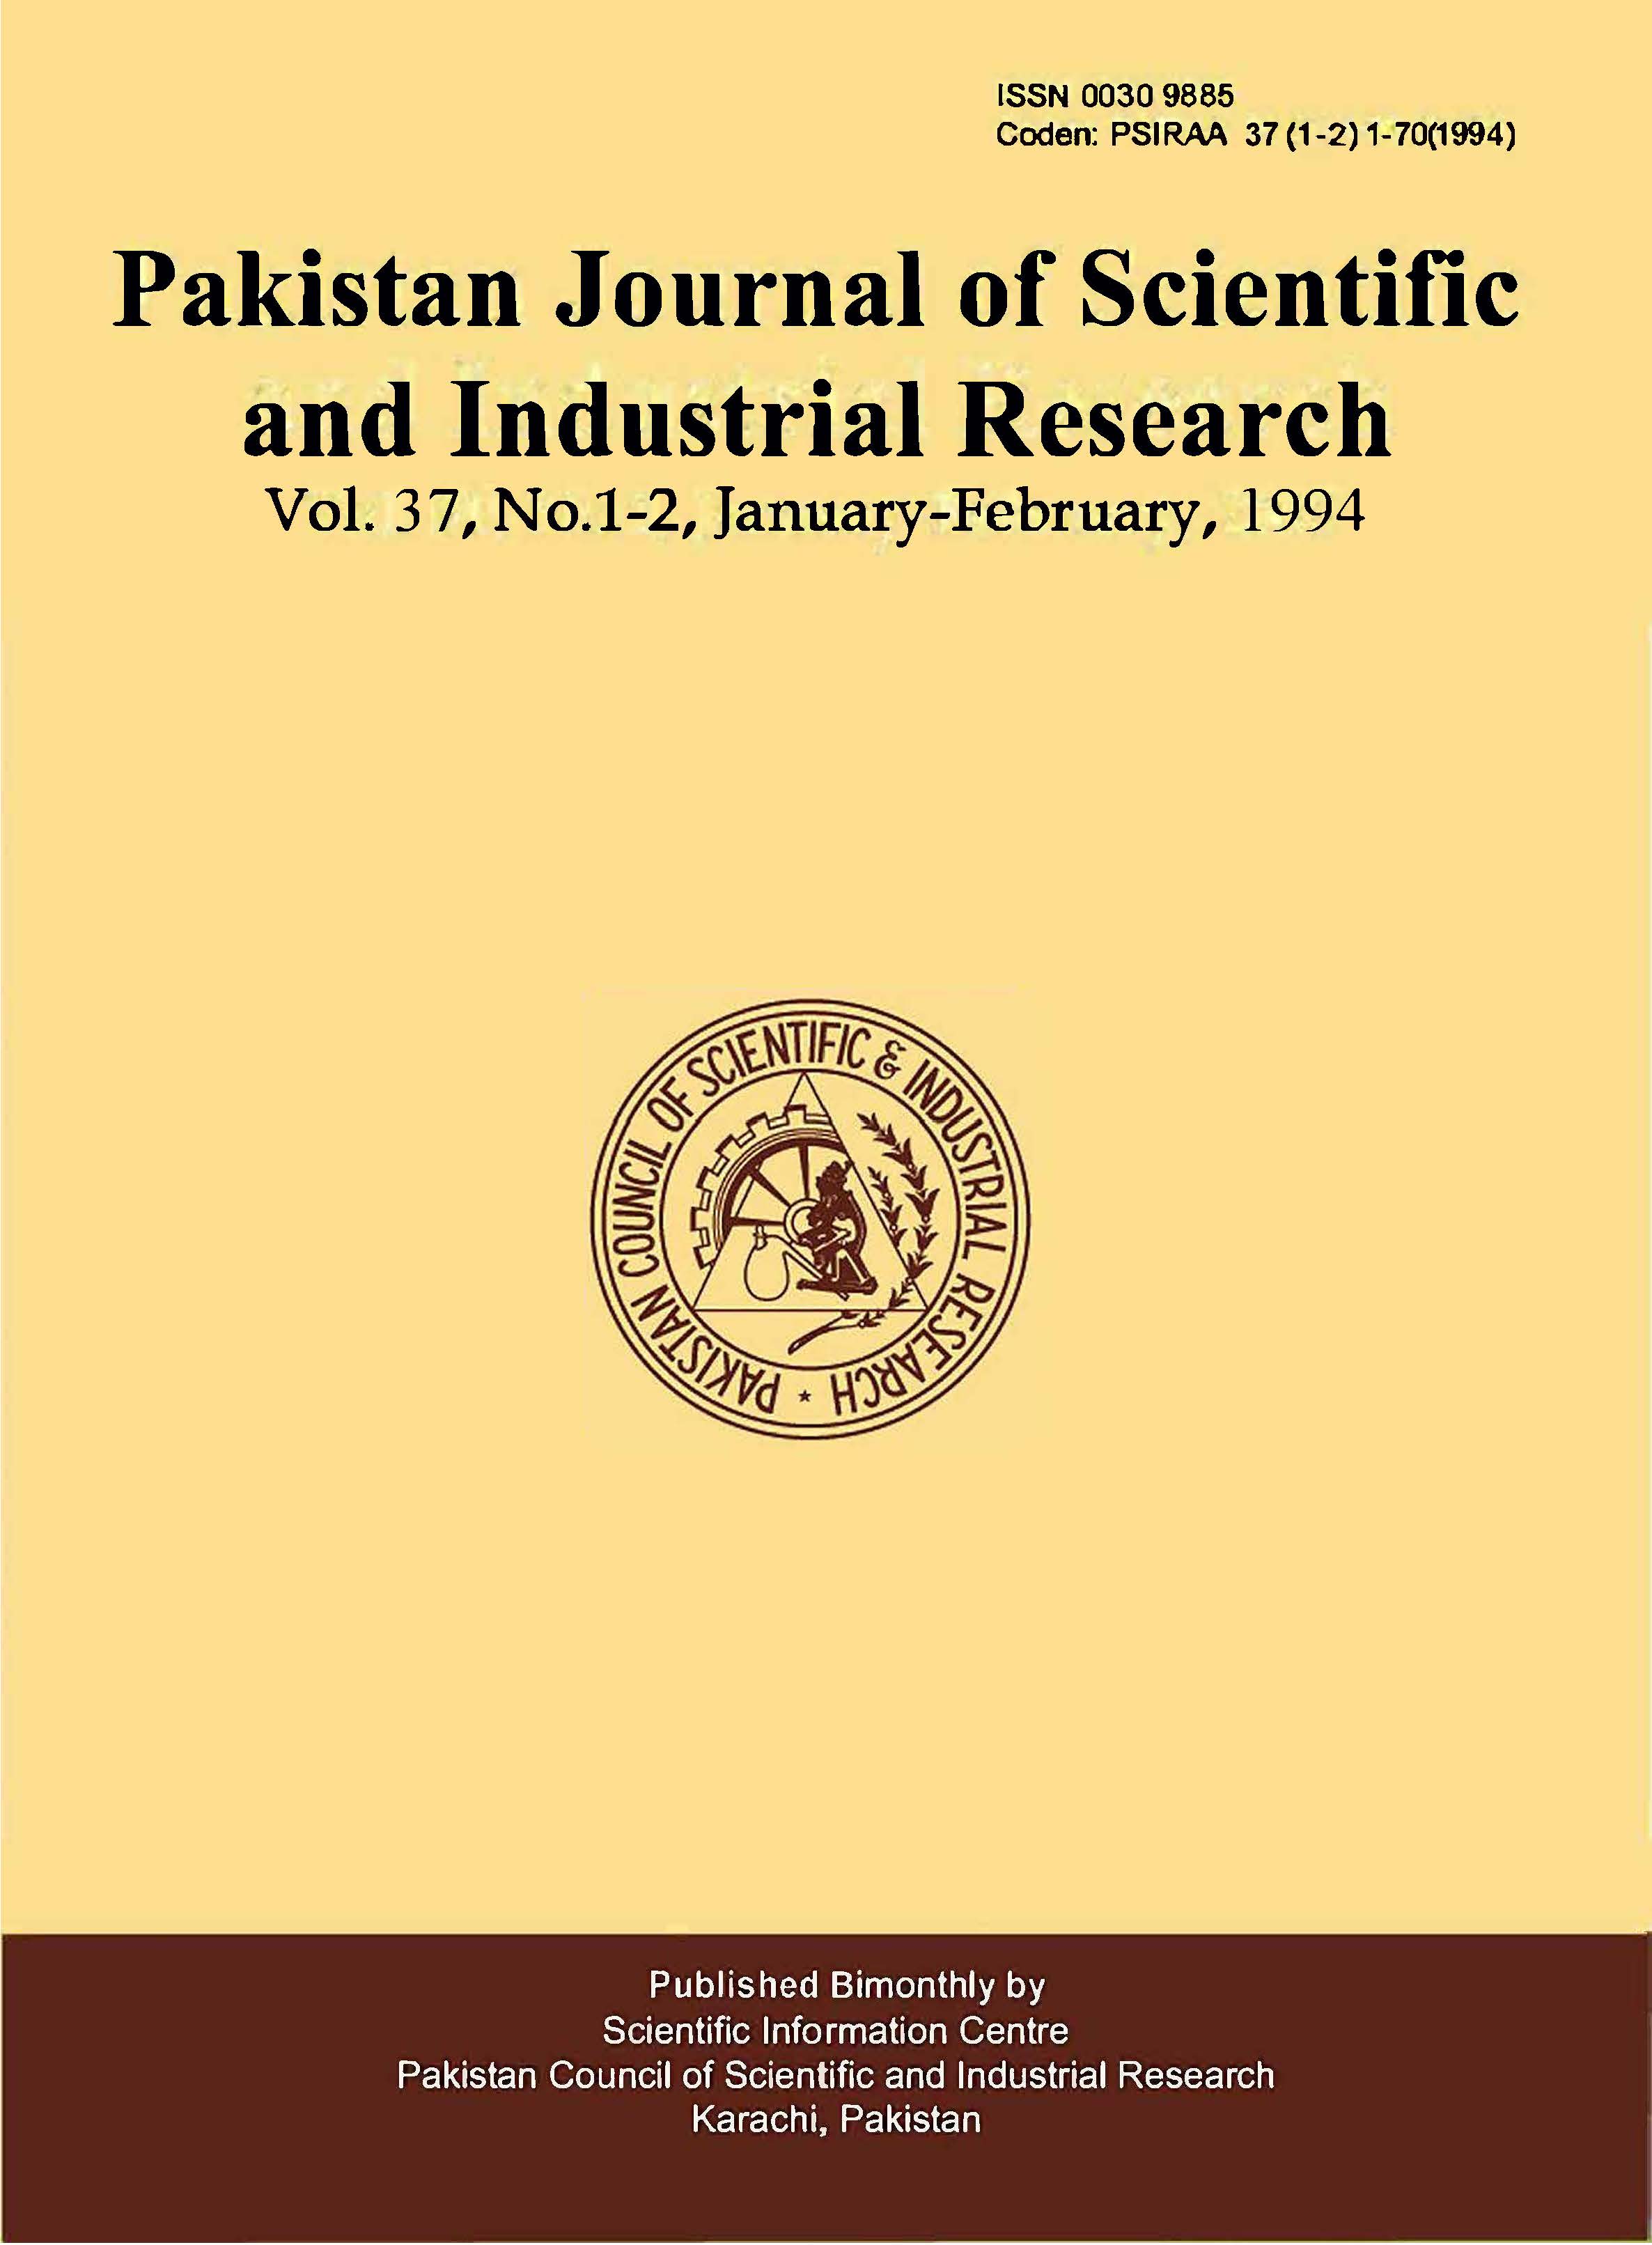 					View Vol. 37 No. 1-2 (1994): Pakistan Journal of Scientific and Industrial Research
				